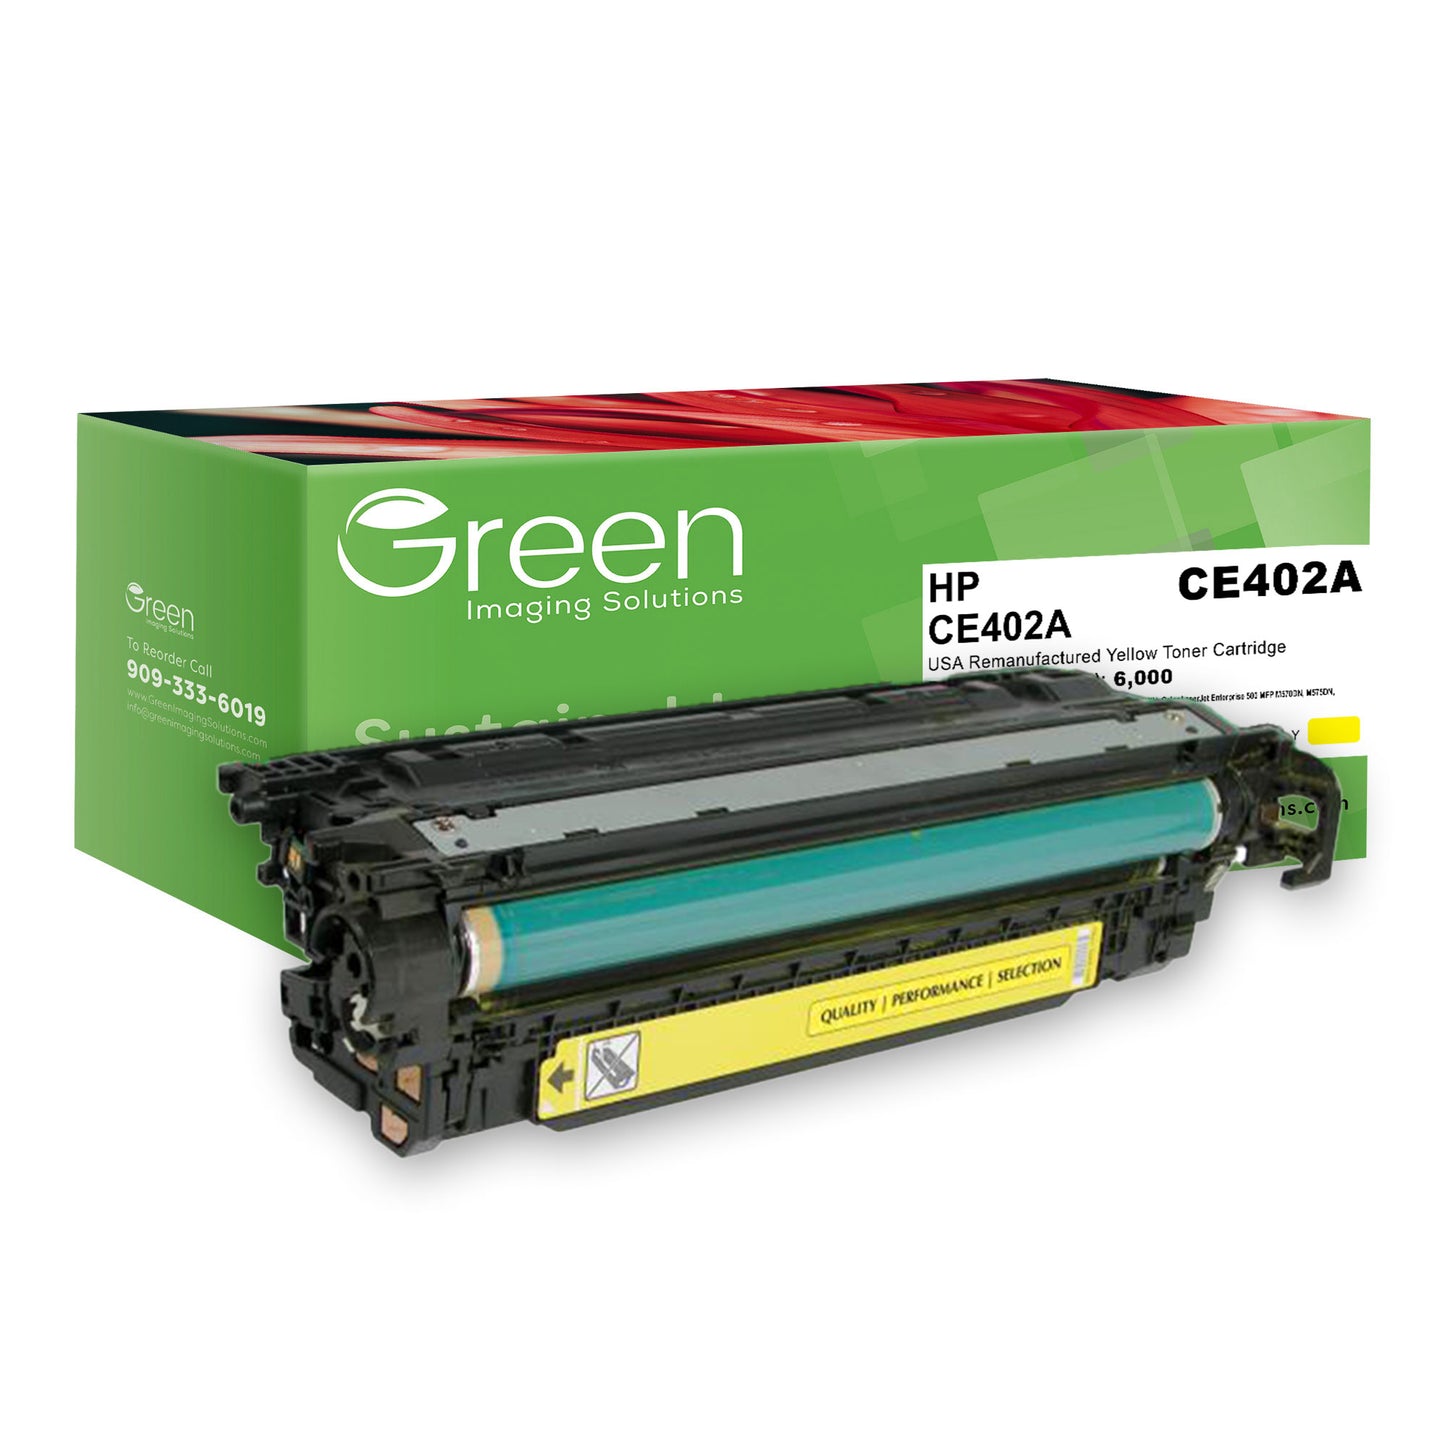 GIS USA Remanufactured Yellow Toner Cartridge for HP CE402A (HP 507A)